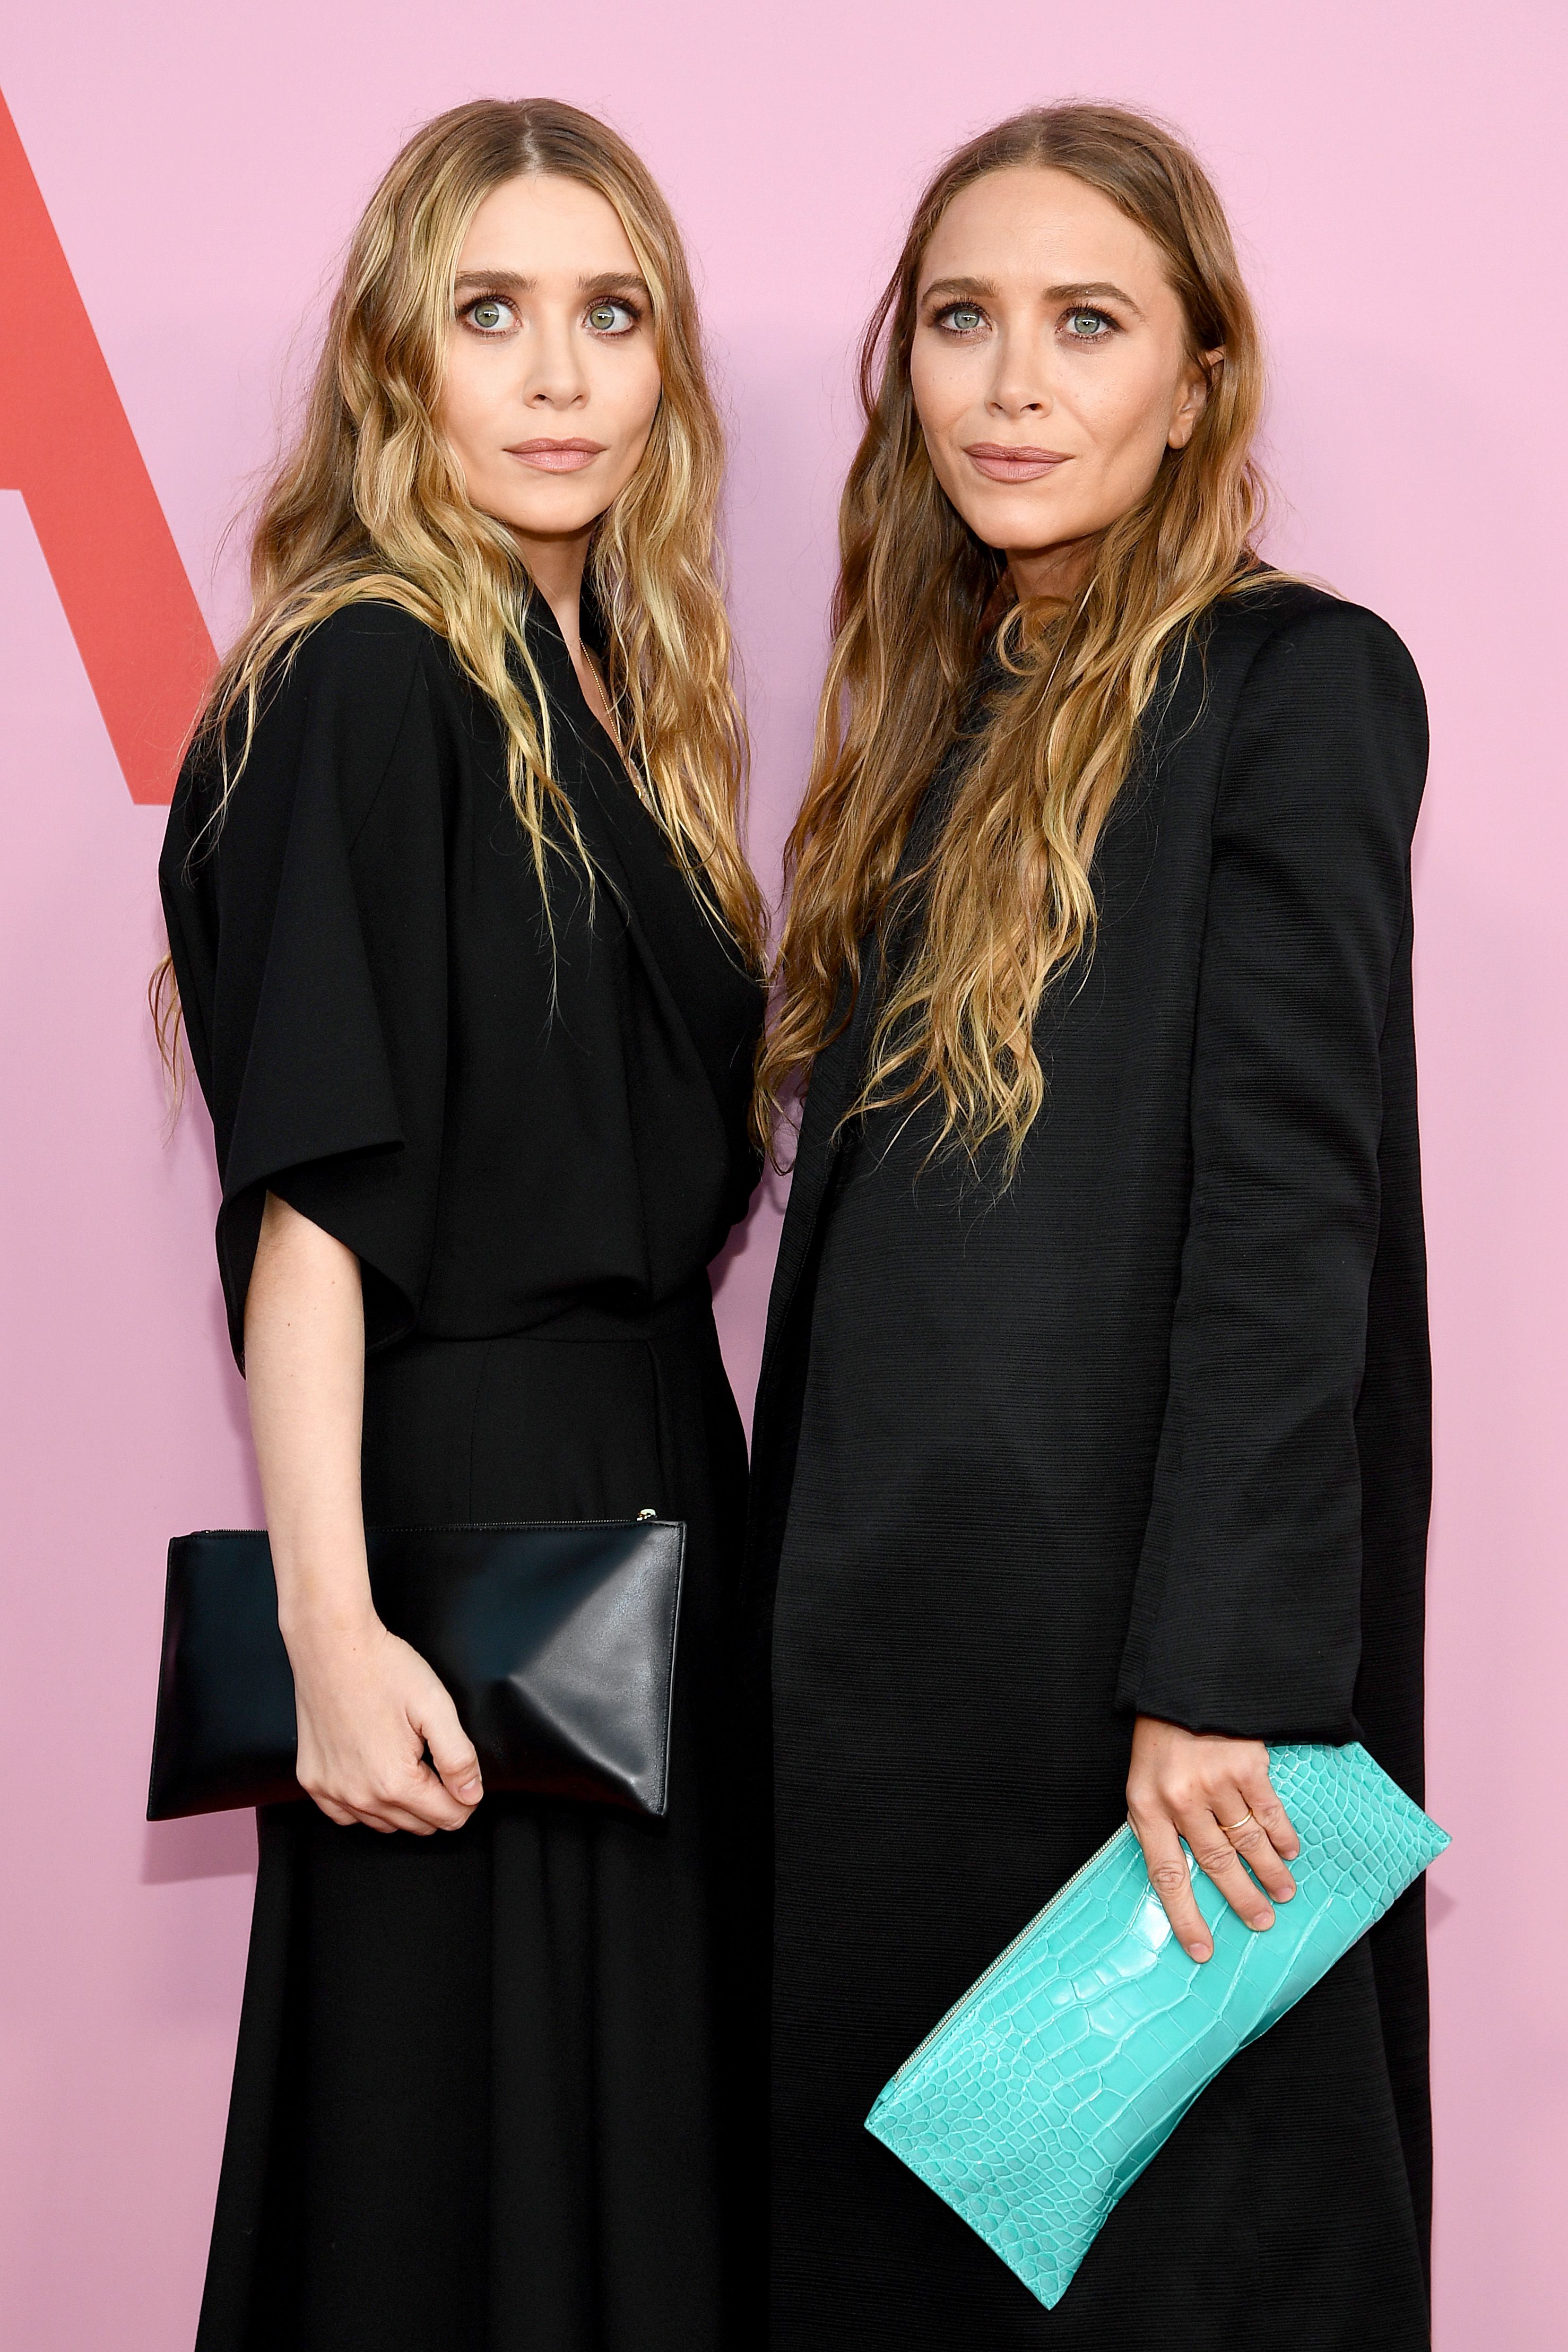 Mary Kate And Ashley Olsen On Working Together As Twins And Being Discreet